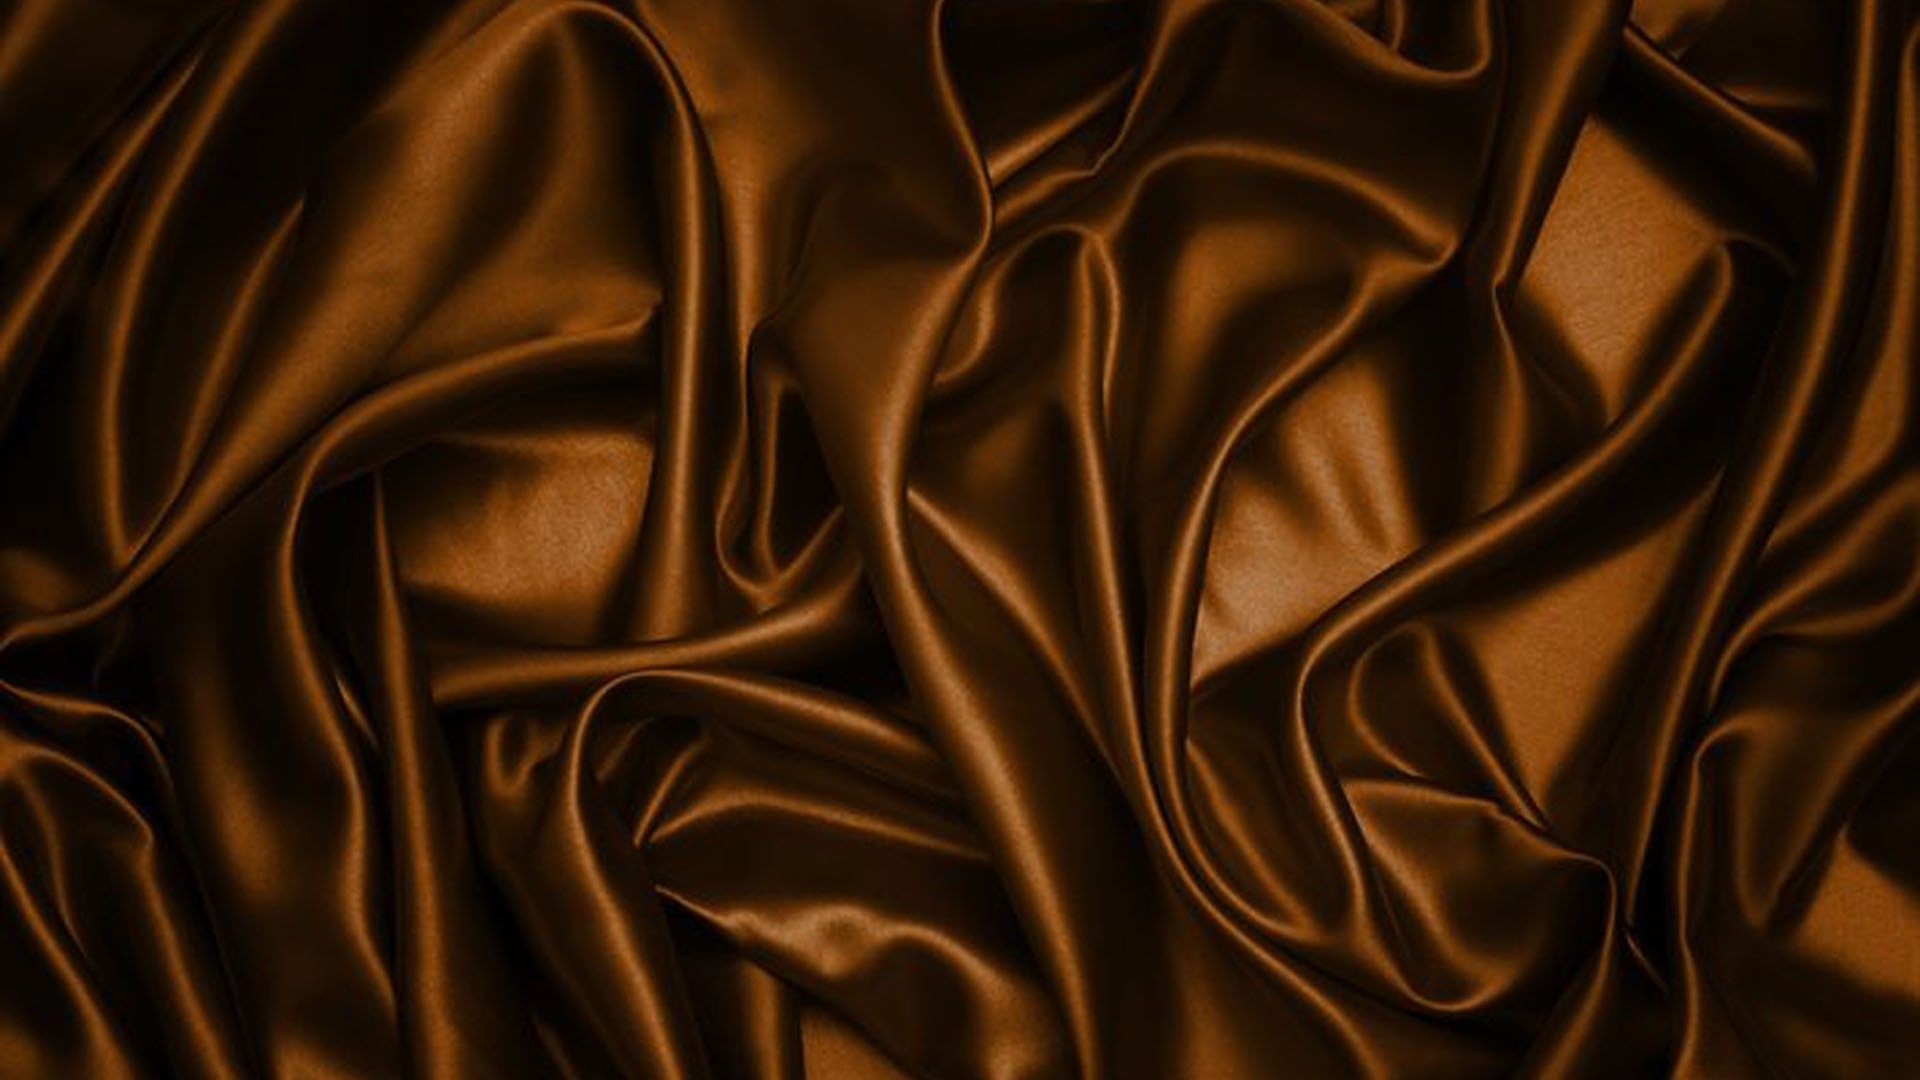 A close up of some brown silk fabric - Brown, silk